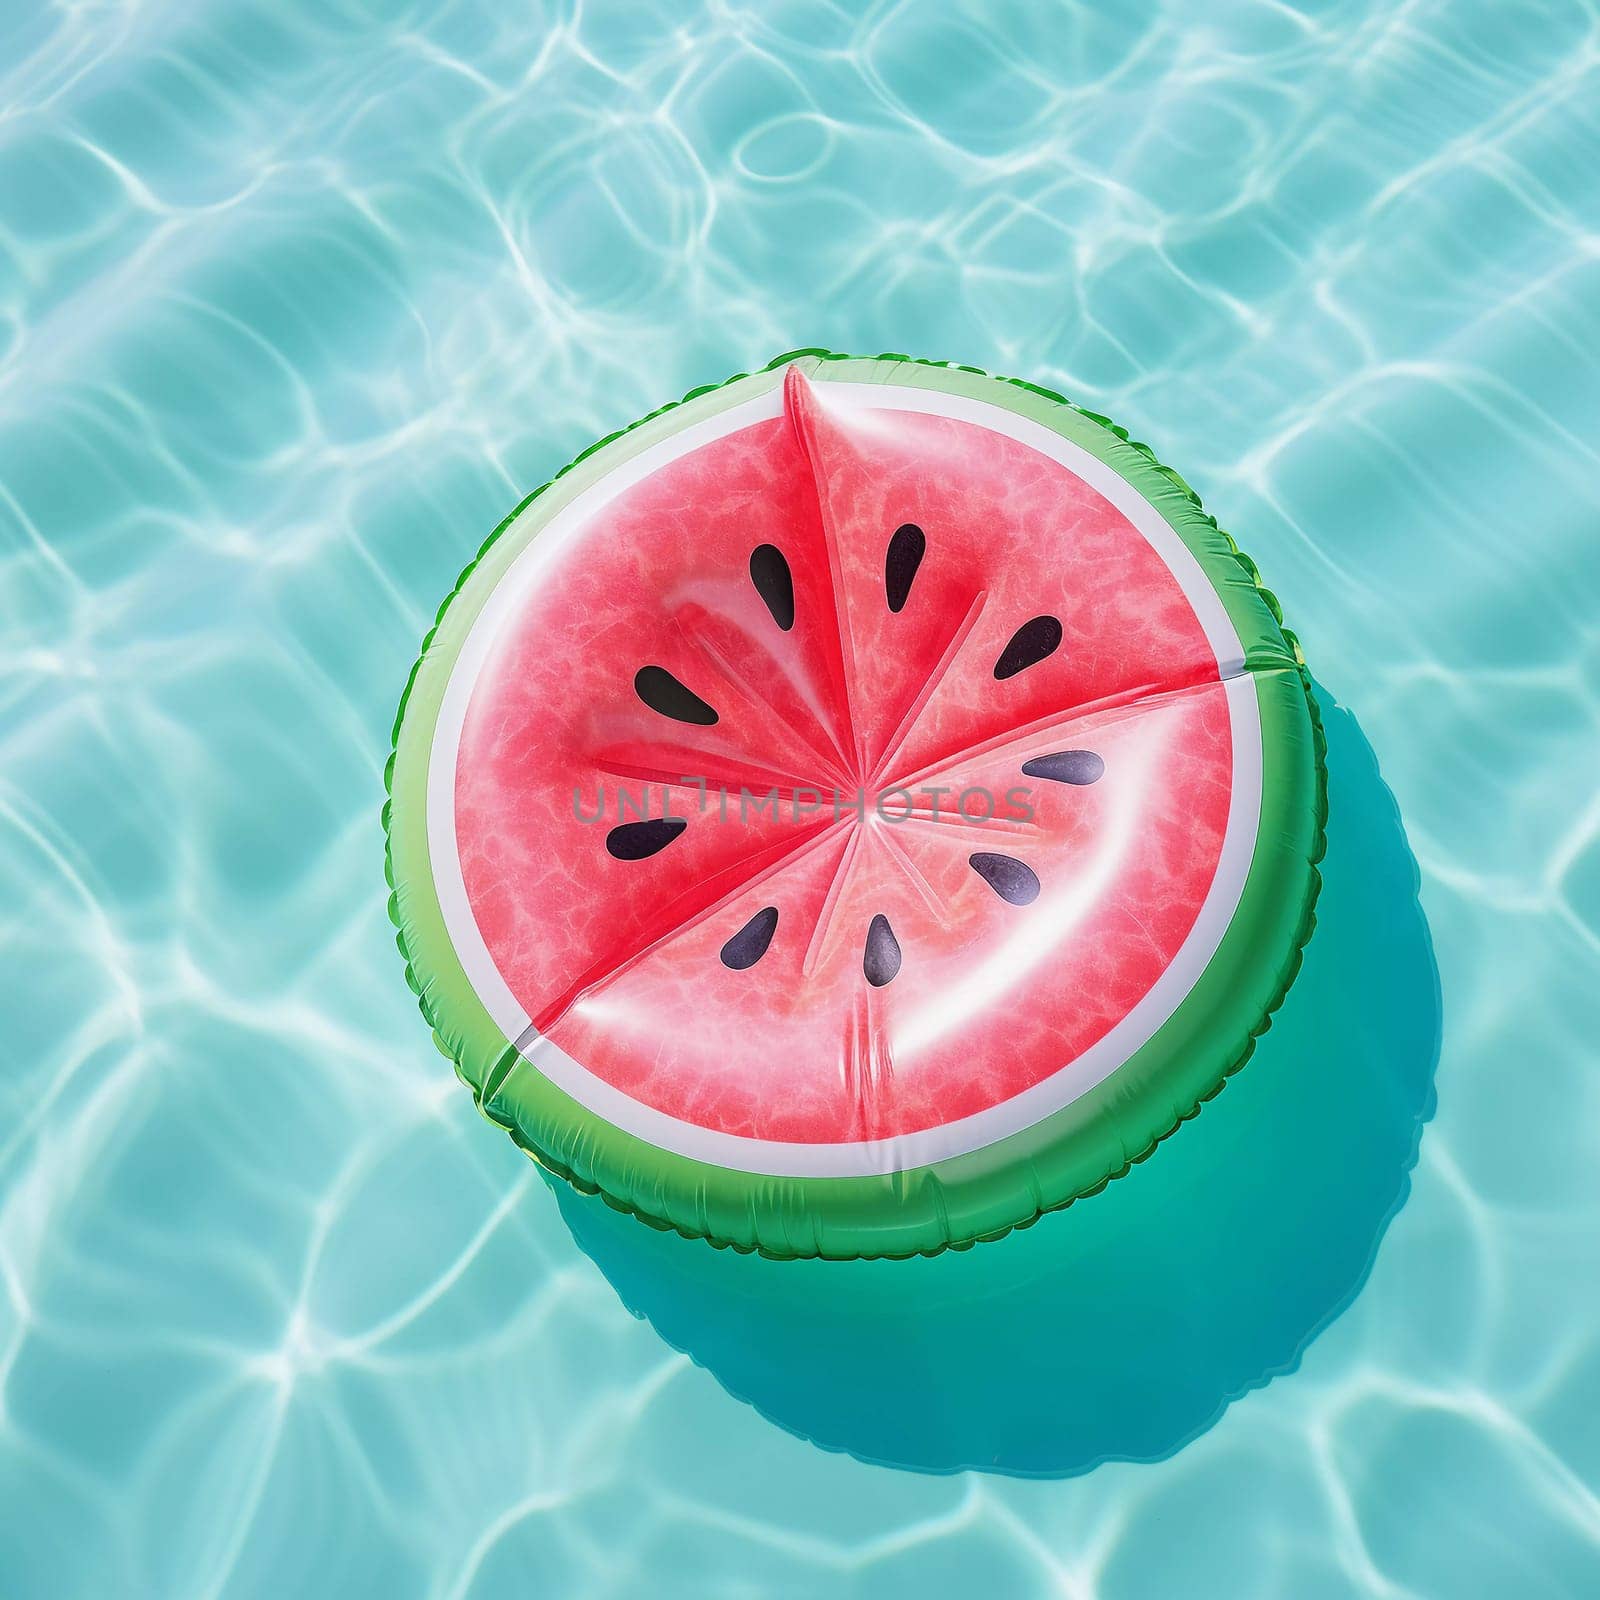 Round Watermelon Air Mattress. Floats on the surface of the water in the pool. Summer colorful vacation background.